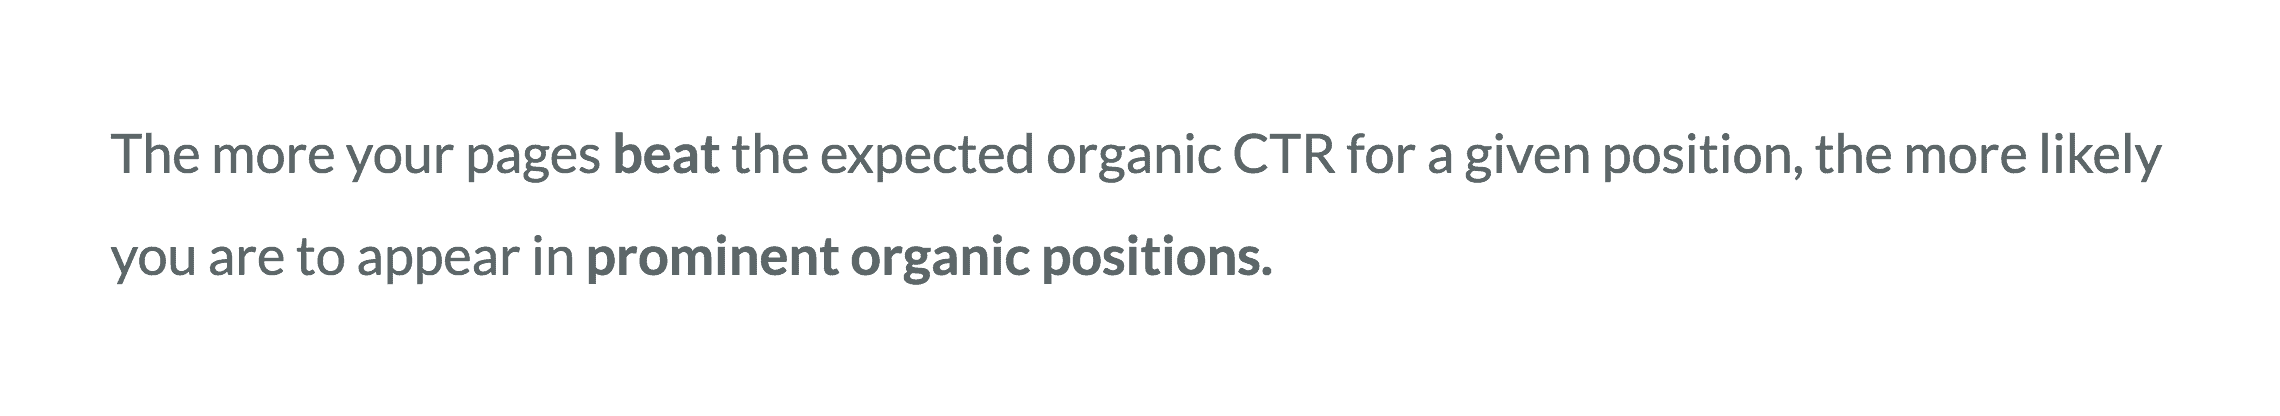 Prominent organic positions